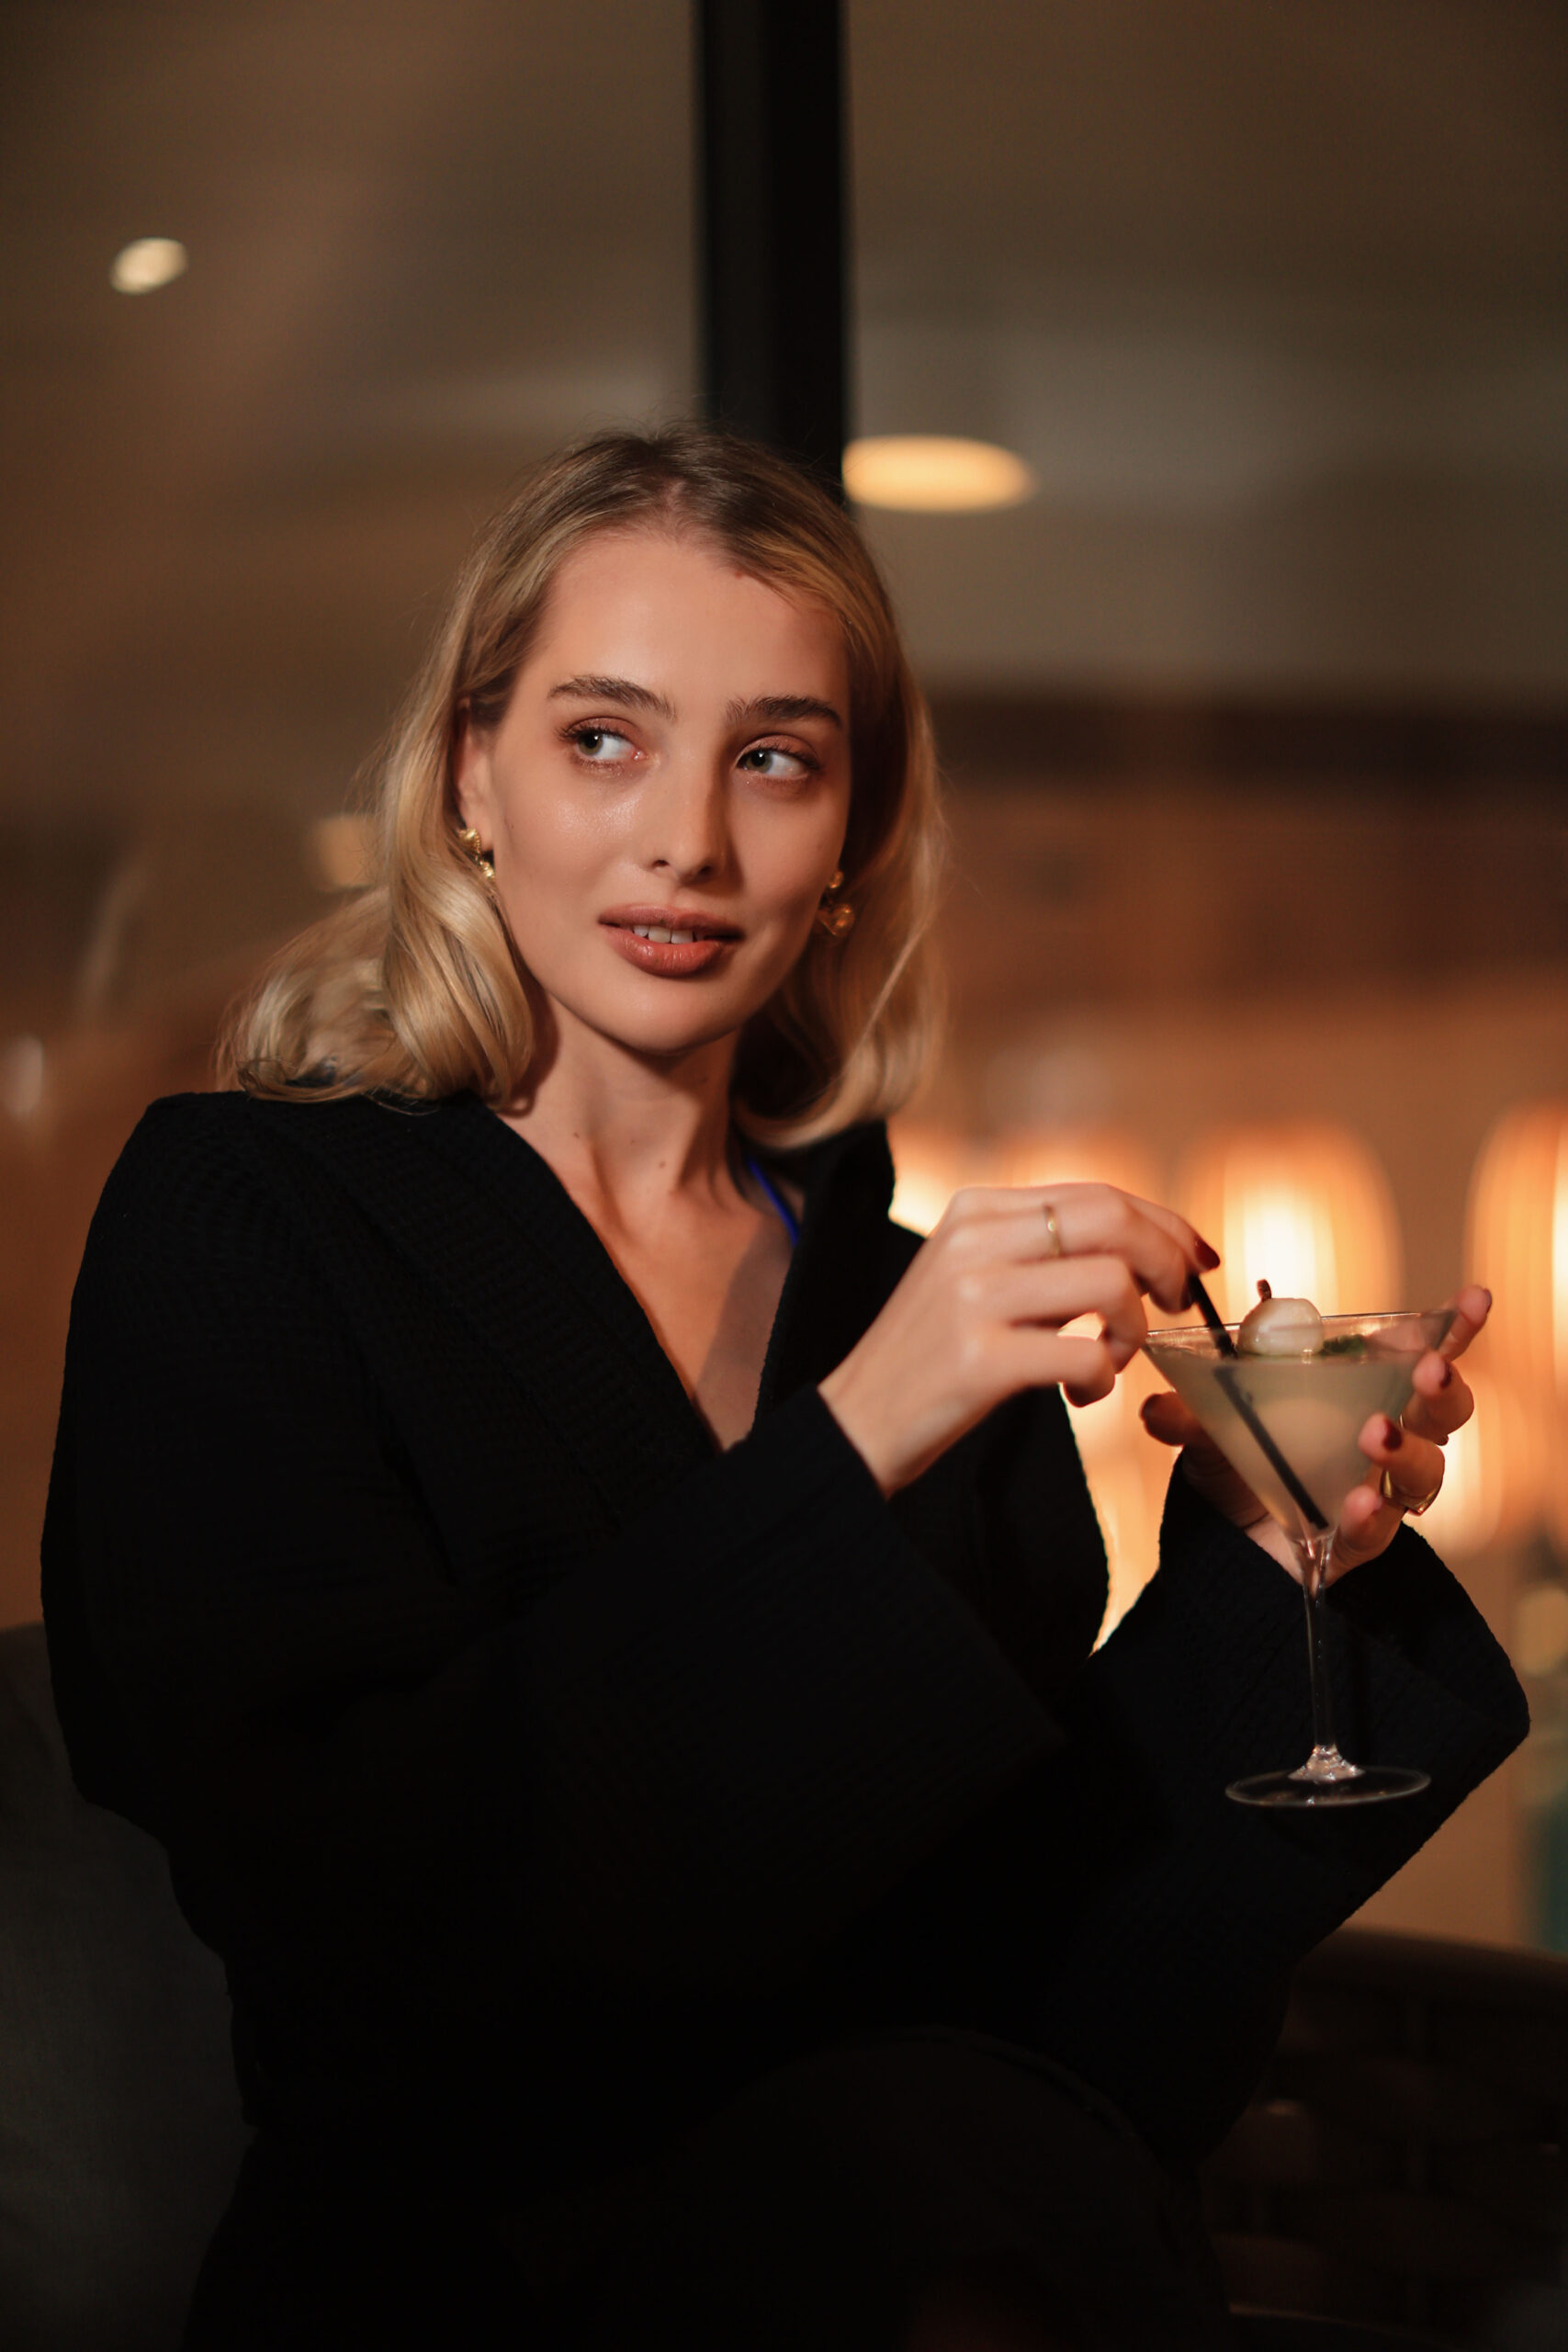 A woman holding a martini glass in a cozy, dimly lit setting.